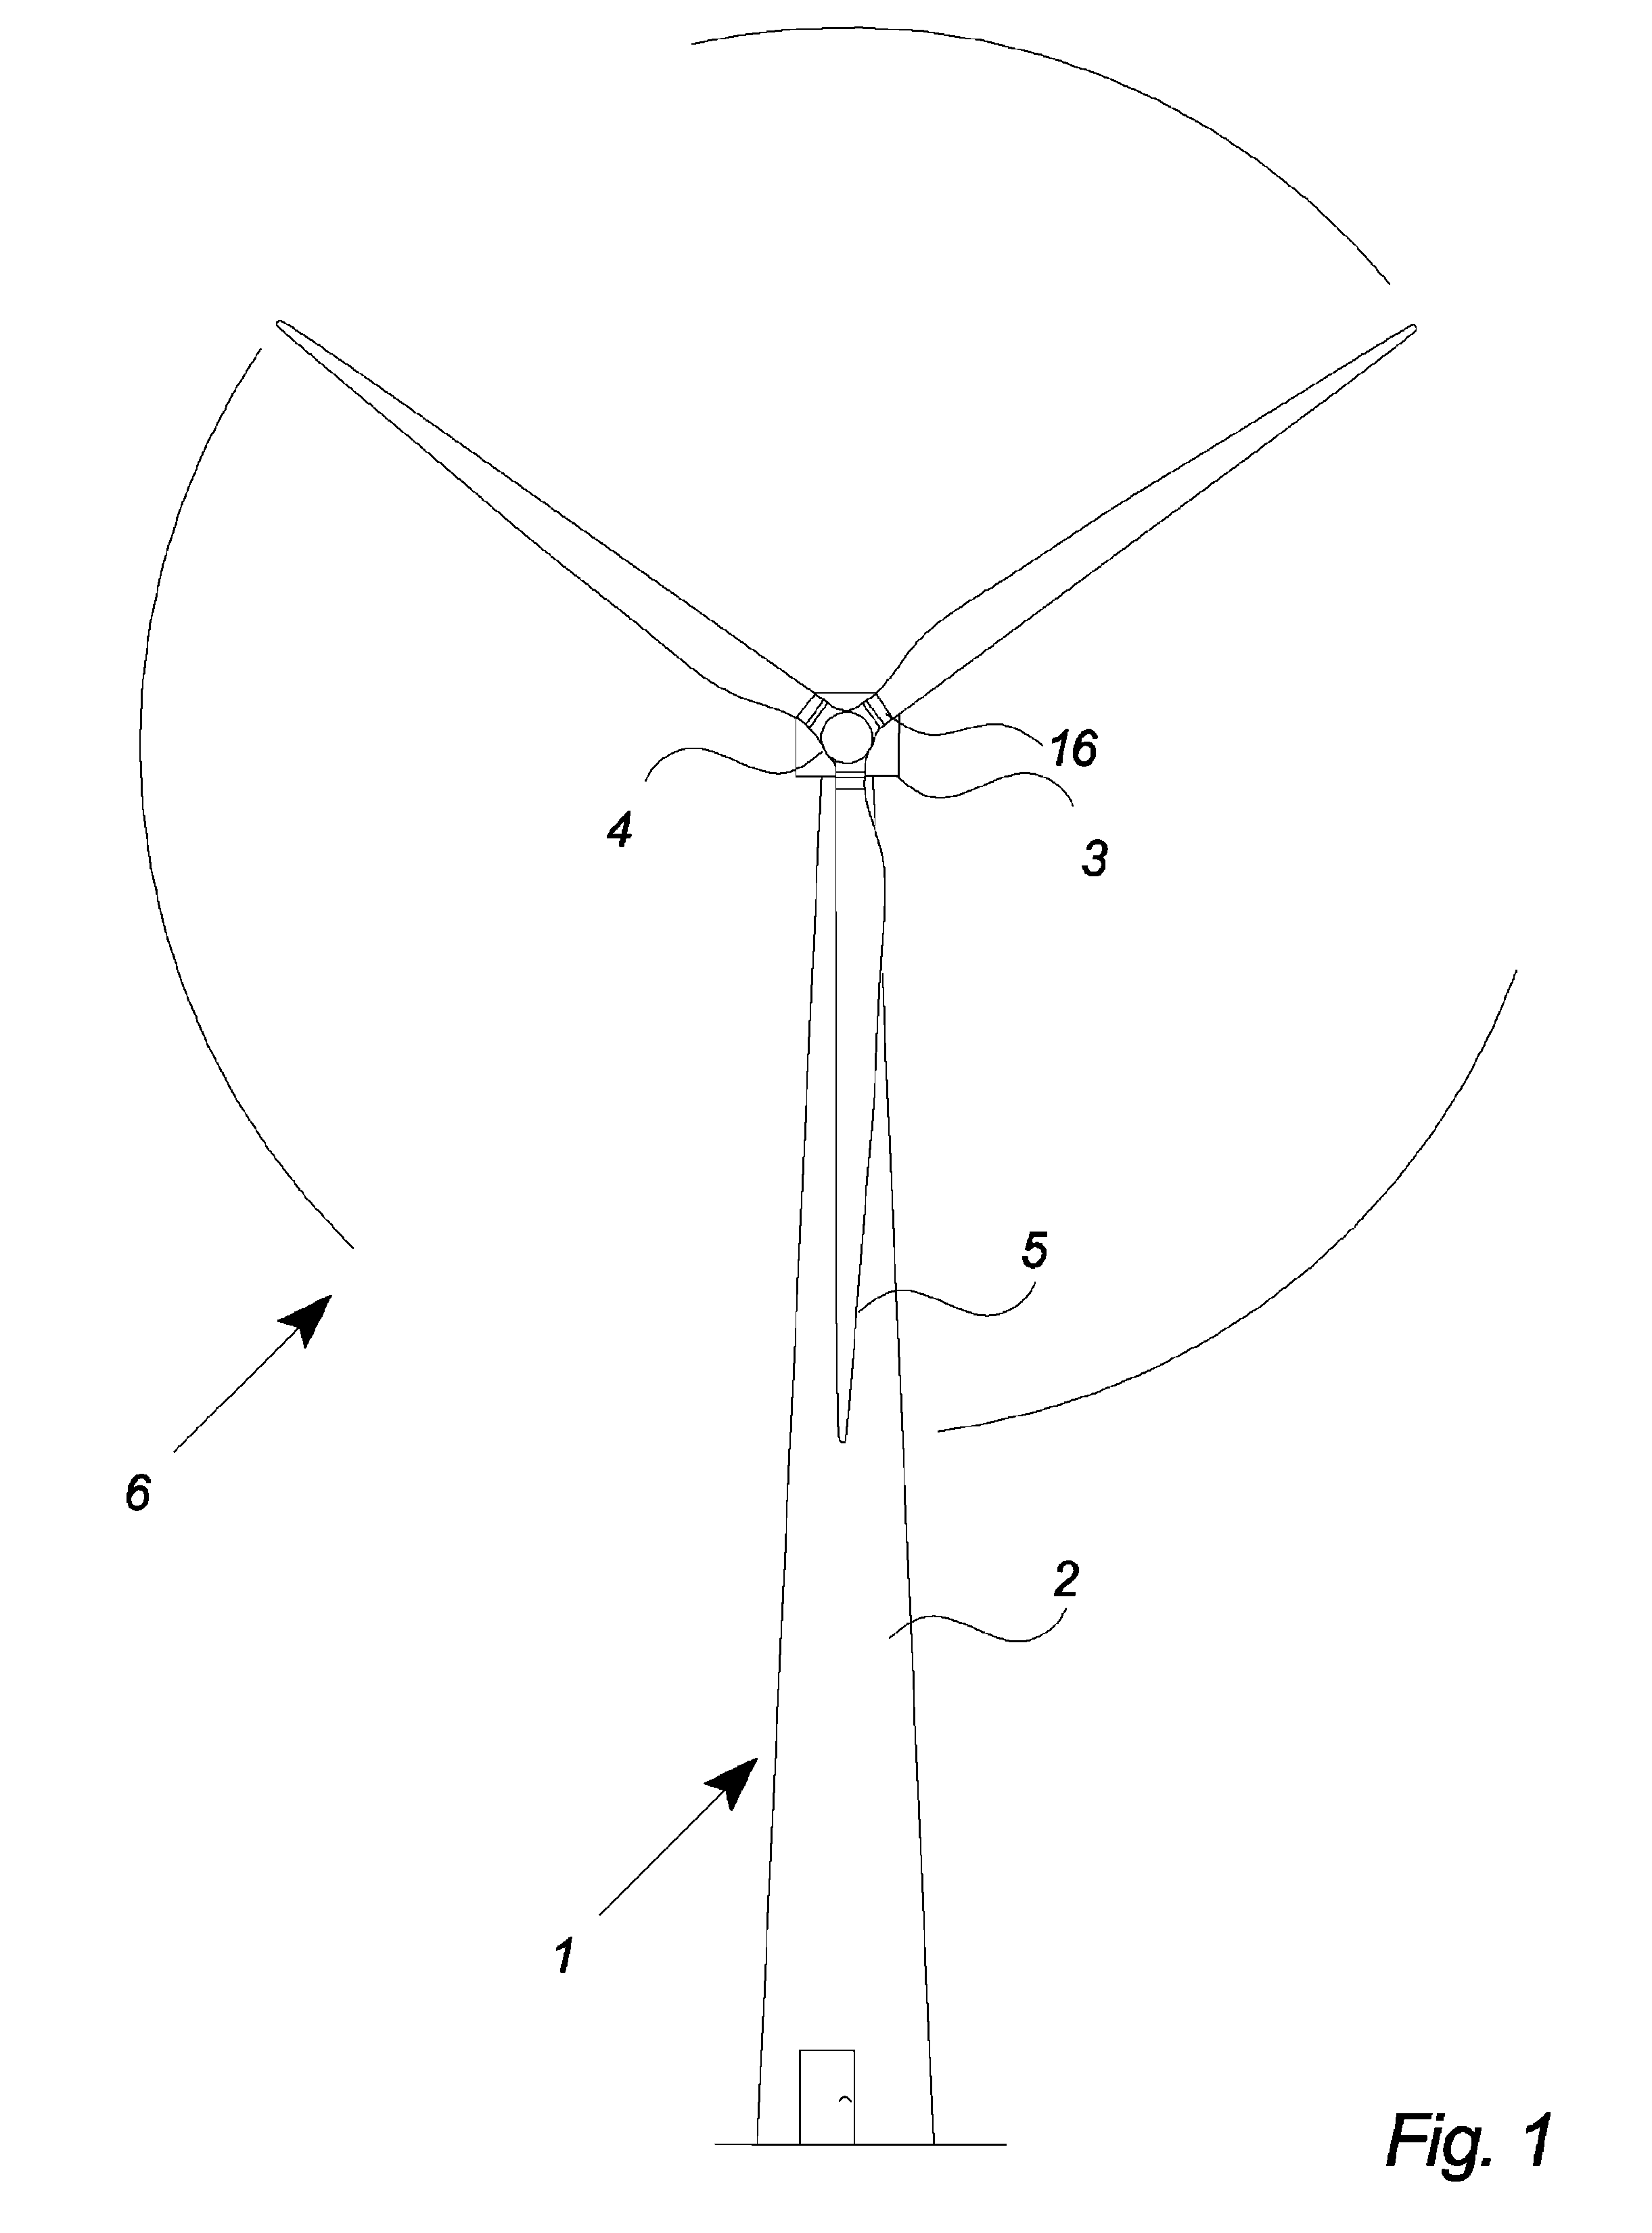 Wind turbine with pitch control arranged to reduce life shortening loads on components thereof